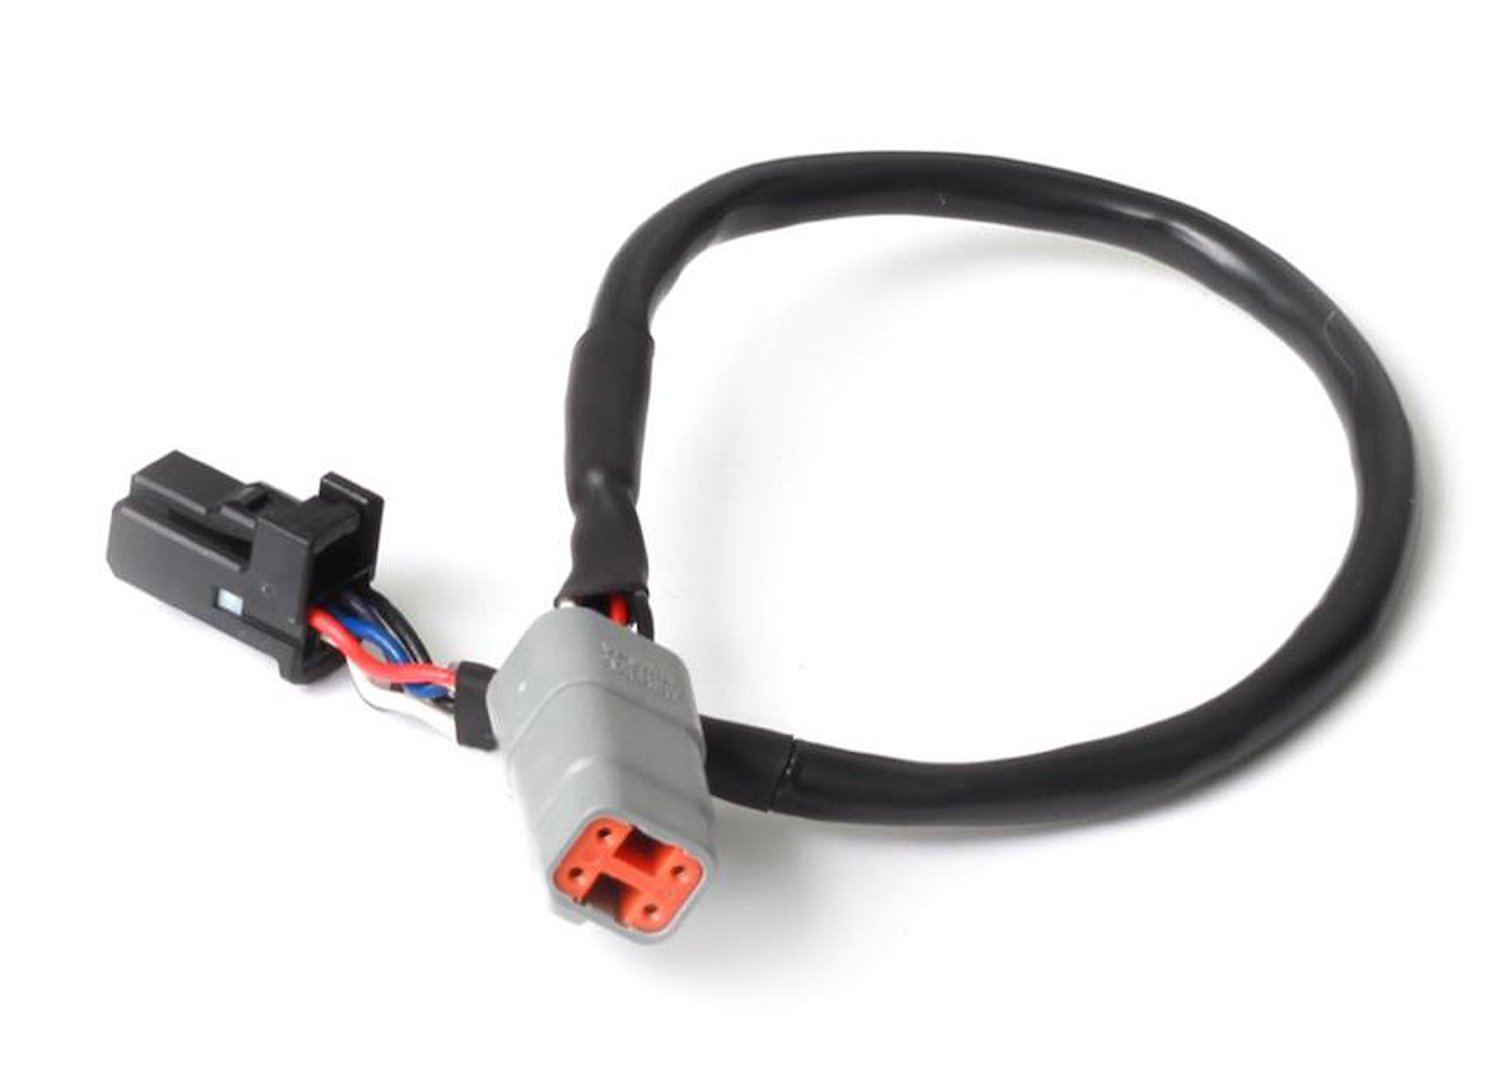 HT-130035 Elite CAN Cable, DTM-4, 8-Pin Black Tyco, 1200 mm (48 in.)